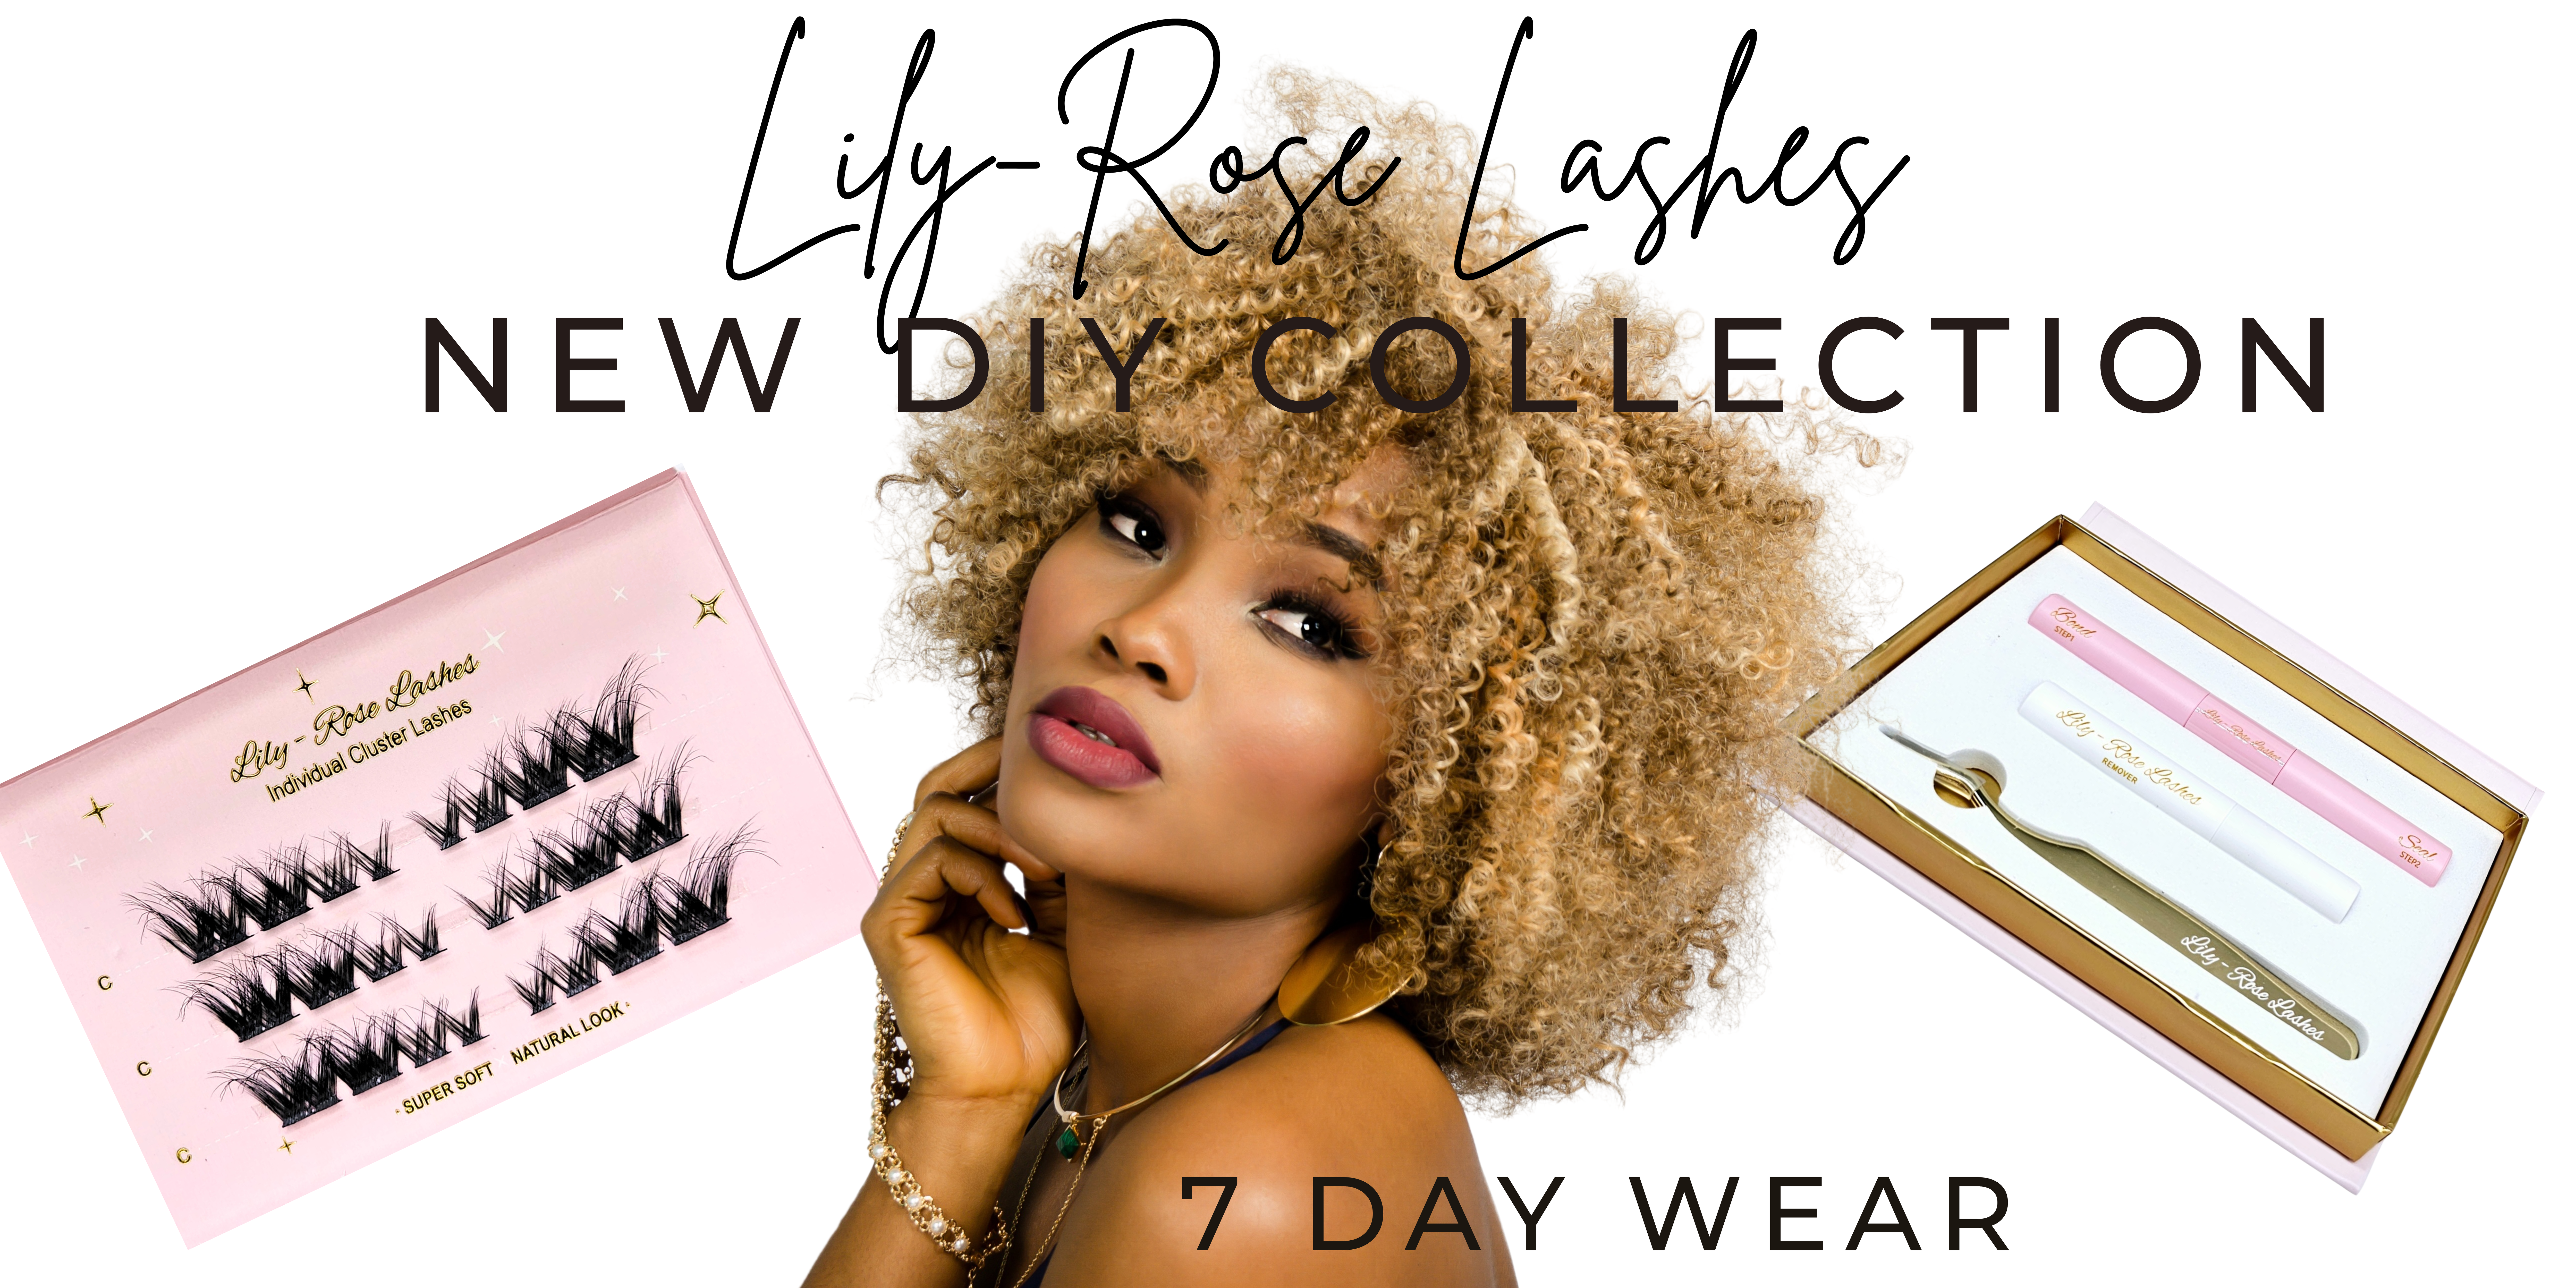 lily-rose DIY lashes web banner